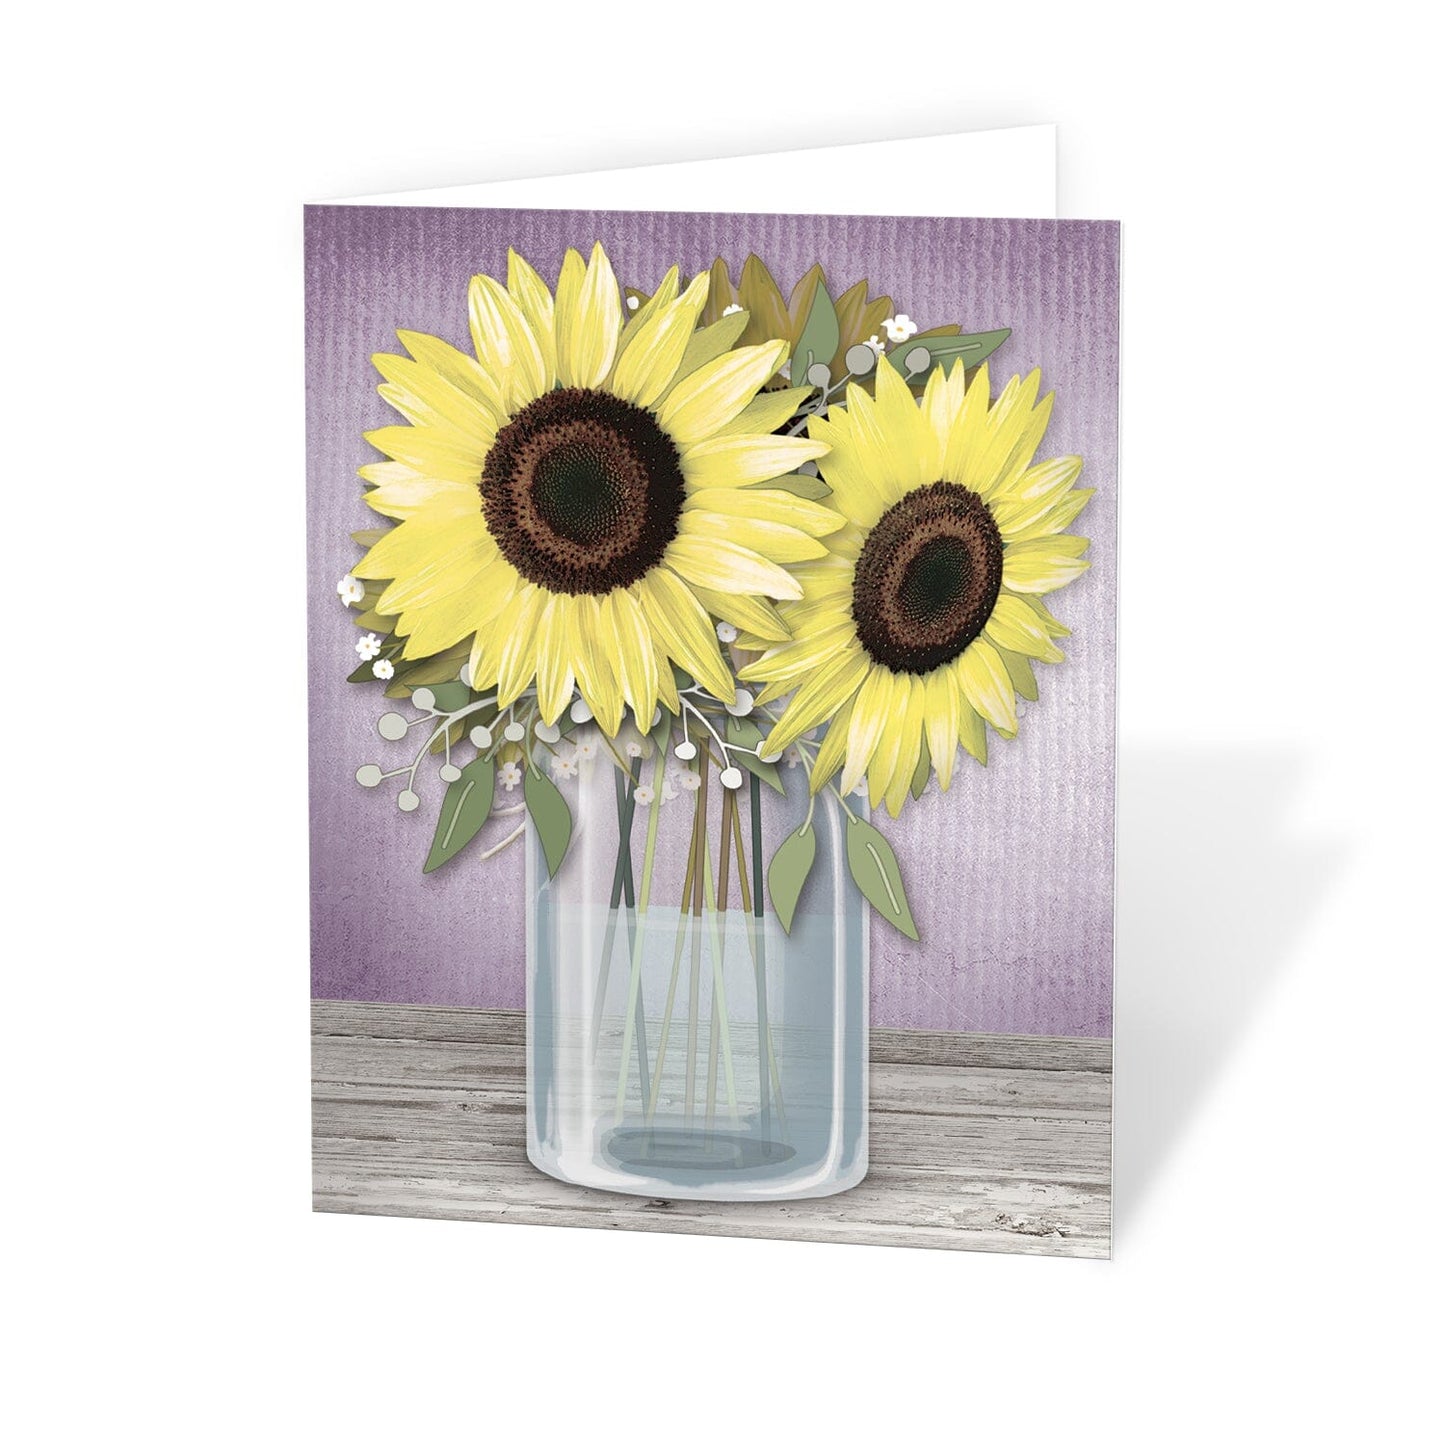 Sunflower Purple Mason Jar Rustic Note Cards at Artistically Invited. Sunflower purple mason jar rustic note cards with a rustic floral theme with yellow sunflowers in a mason jar filled with water, on a light wood tabletop, over a rustic purple background.